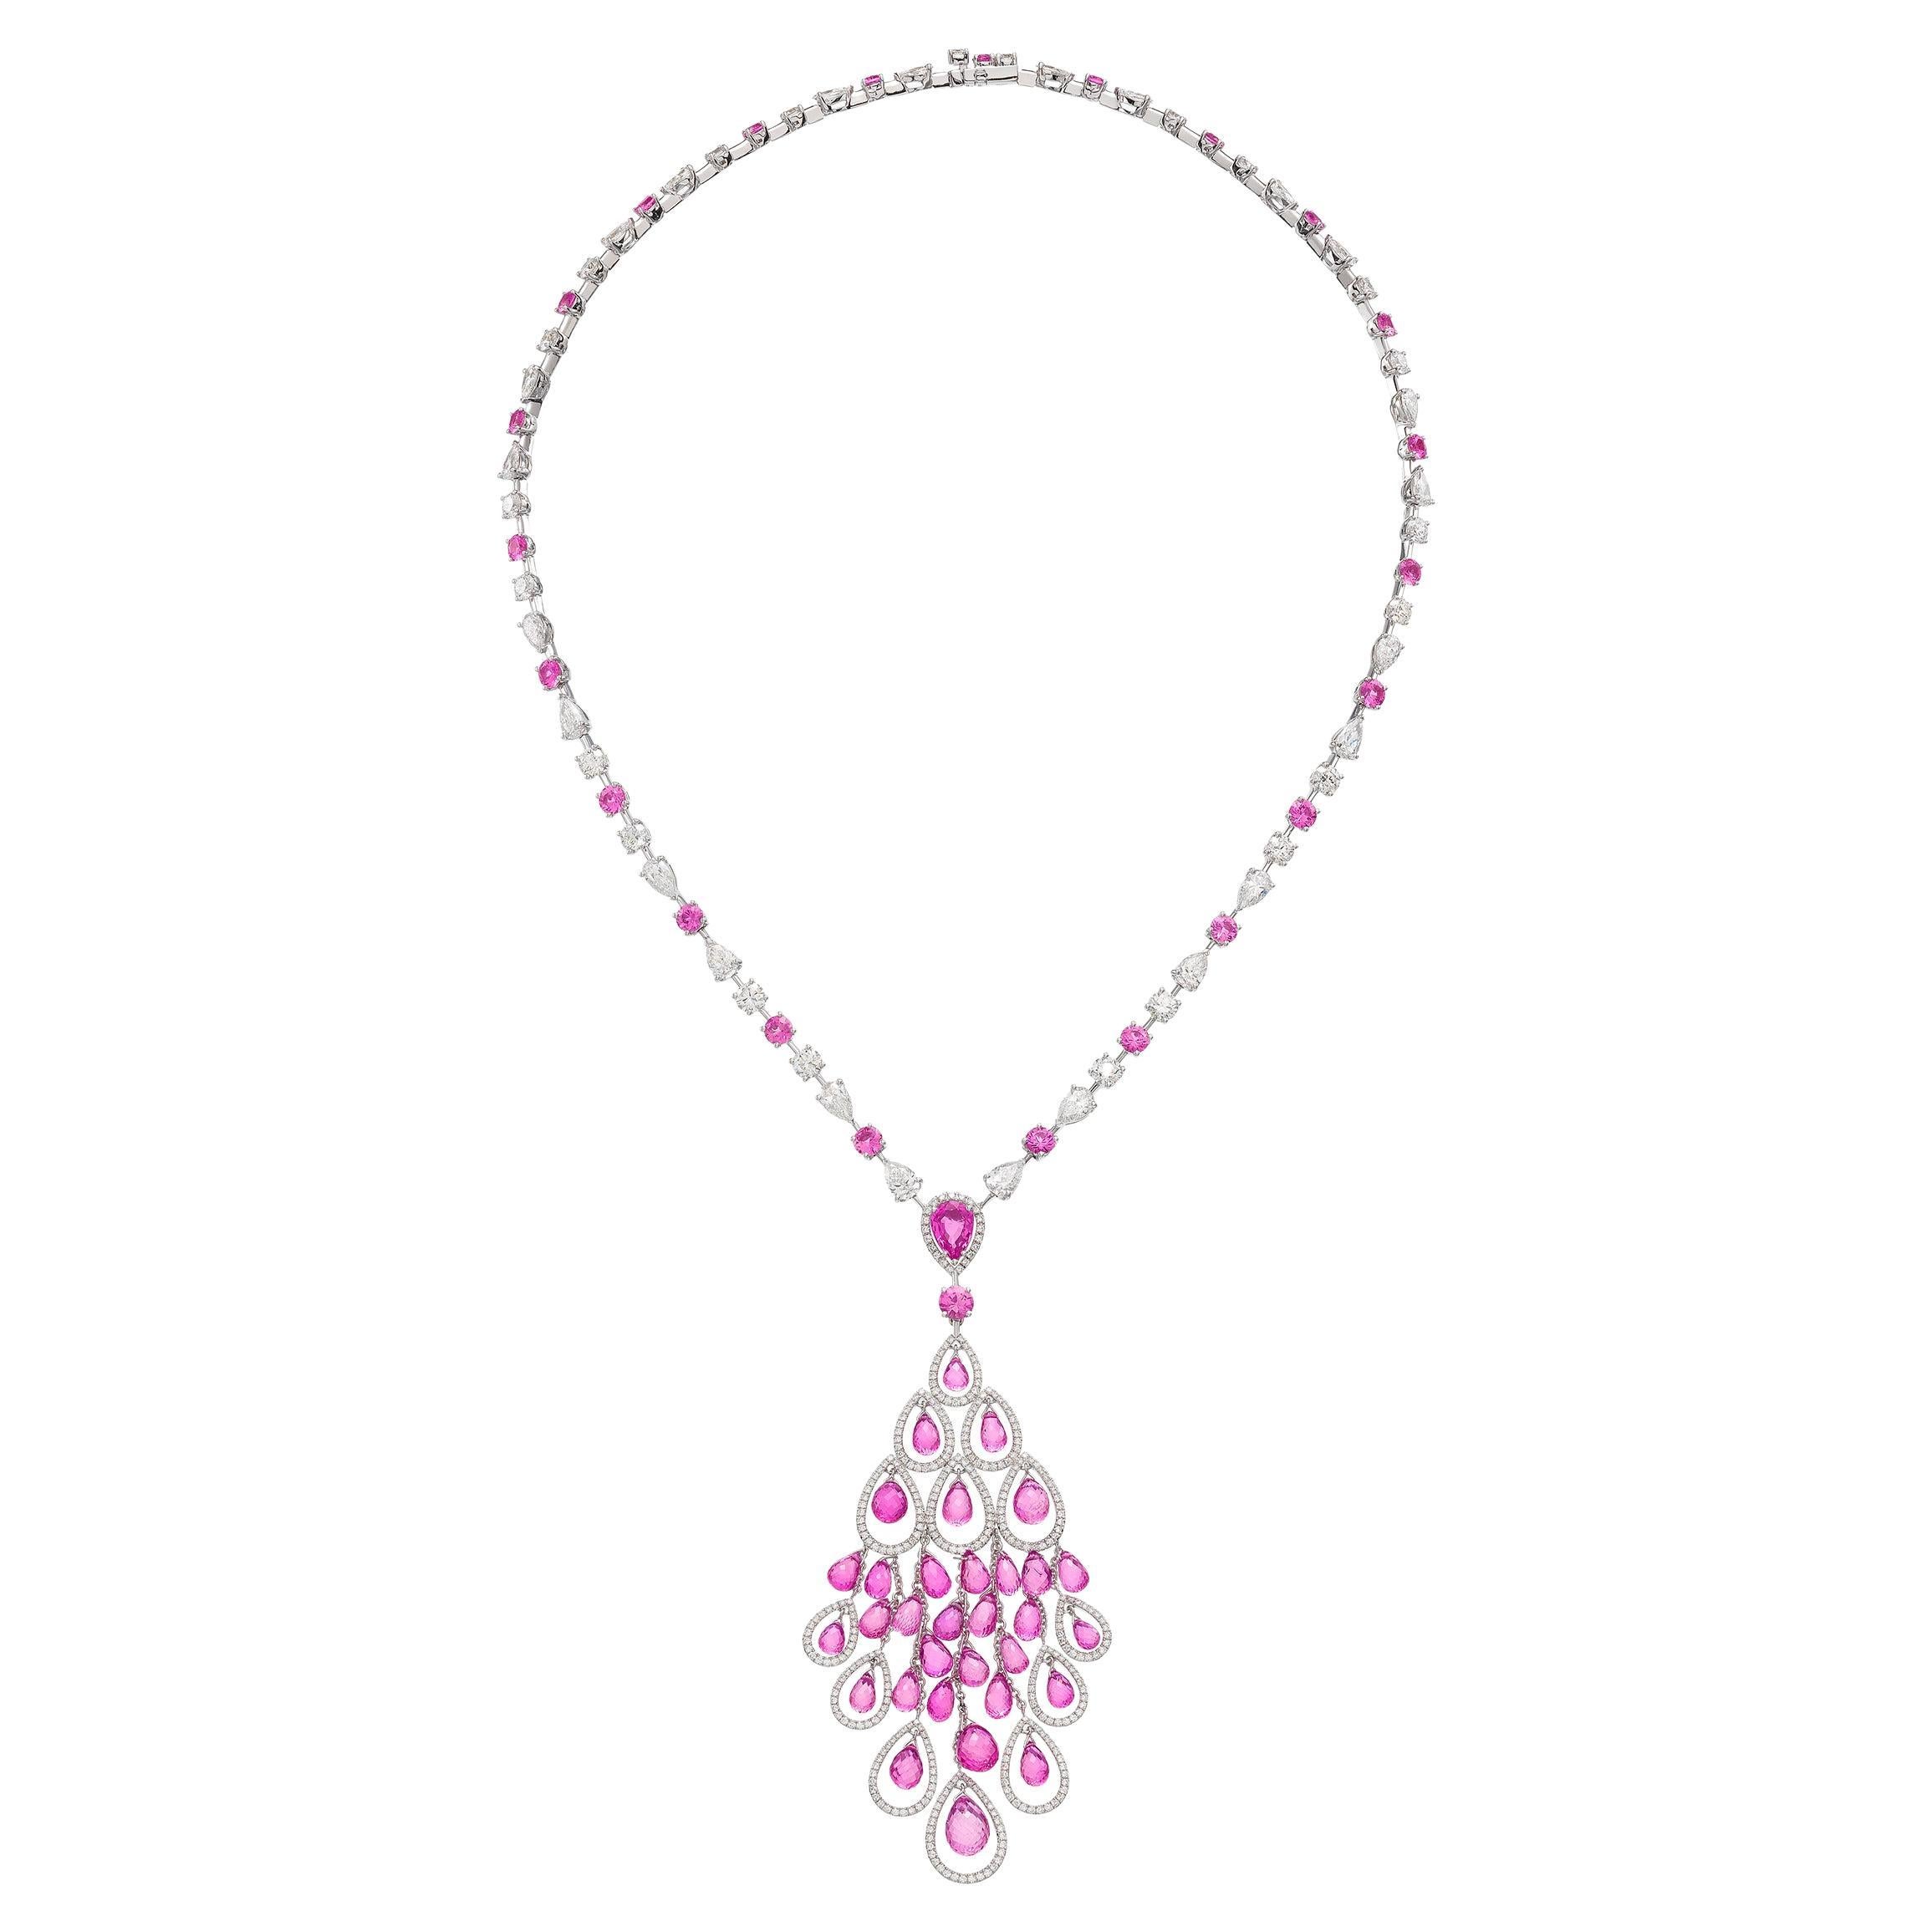 Graff Diamond Pink Sapphire Necklace in 18k Gold "as New" with Certificate & Box